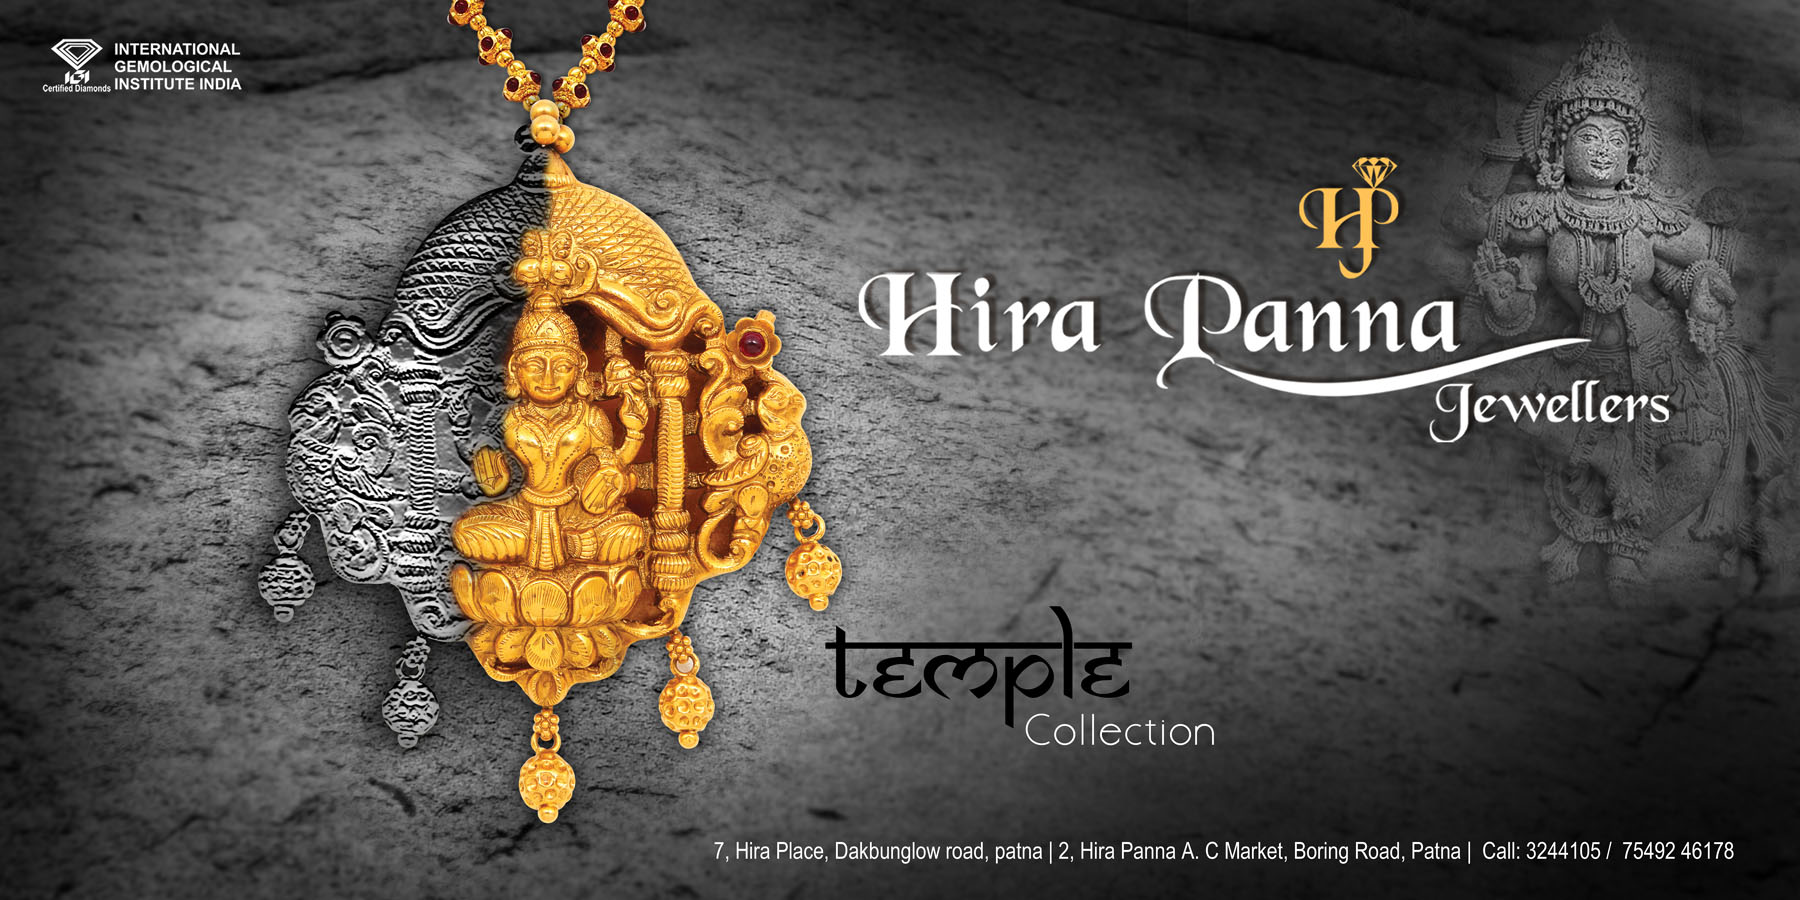 Posters for Hira Panna Jewellers